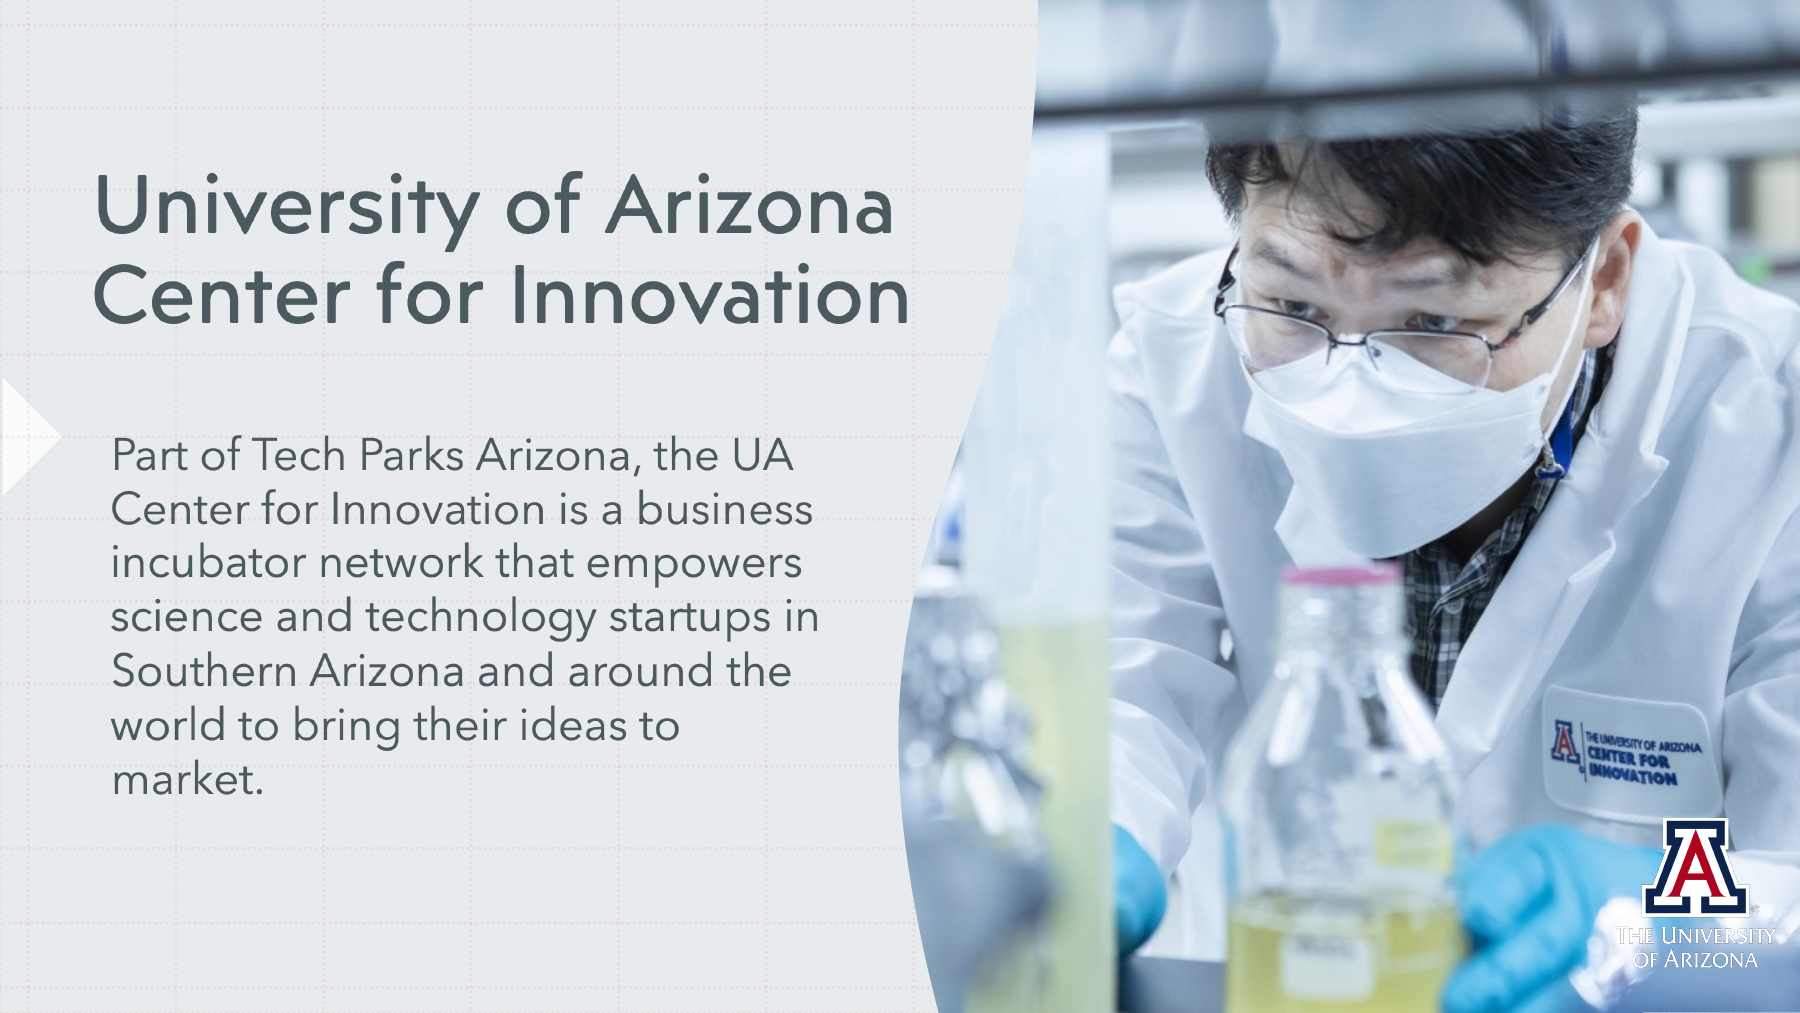 The UA Center for Innovation empowers science and technology startups 